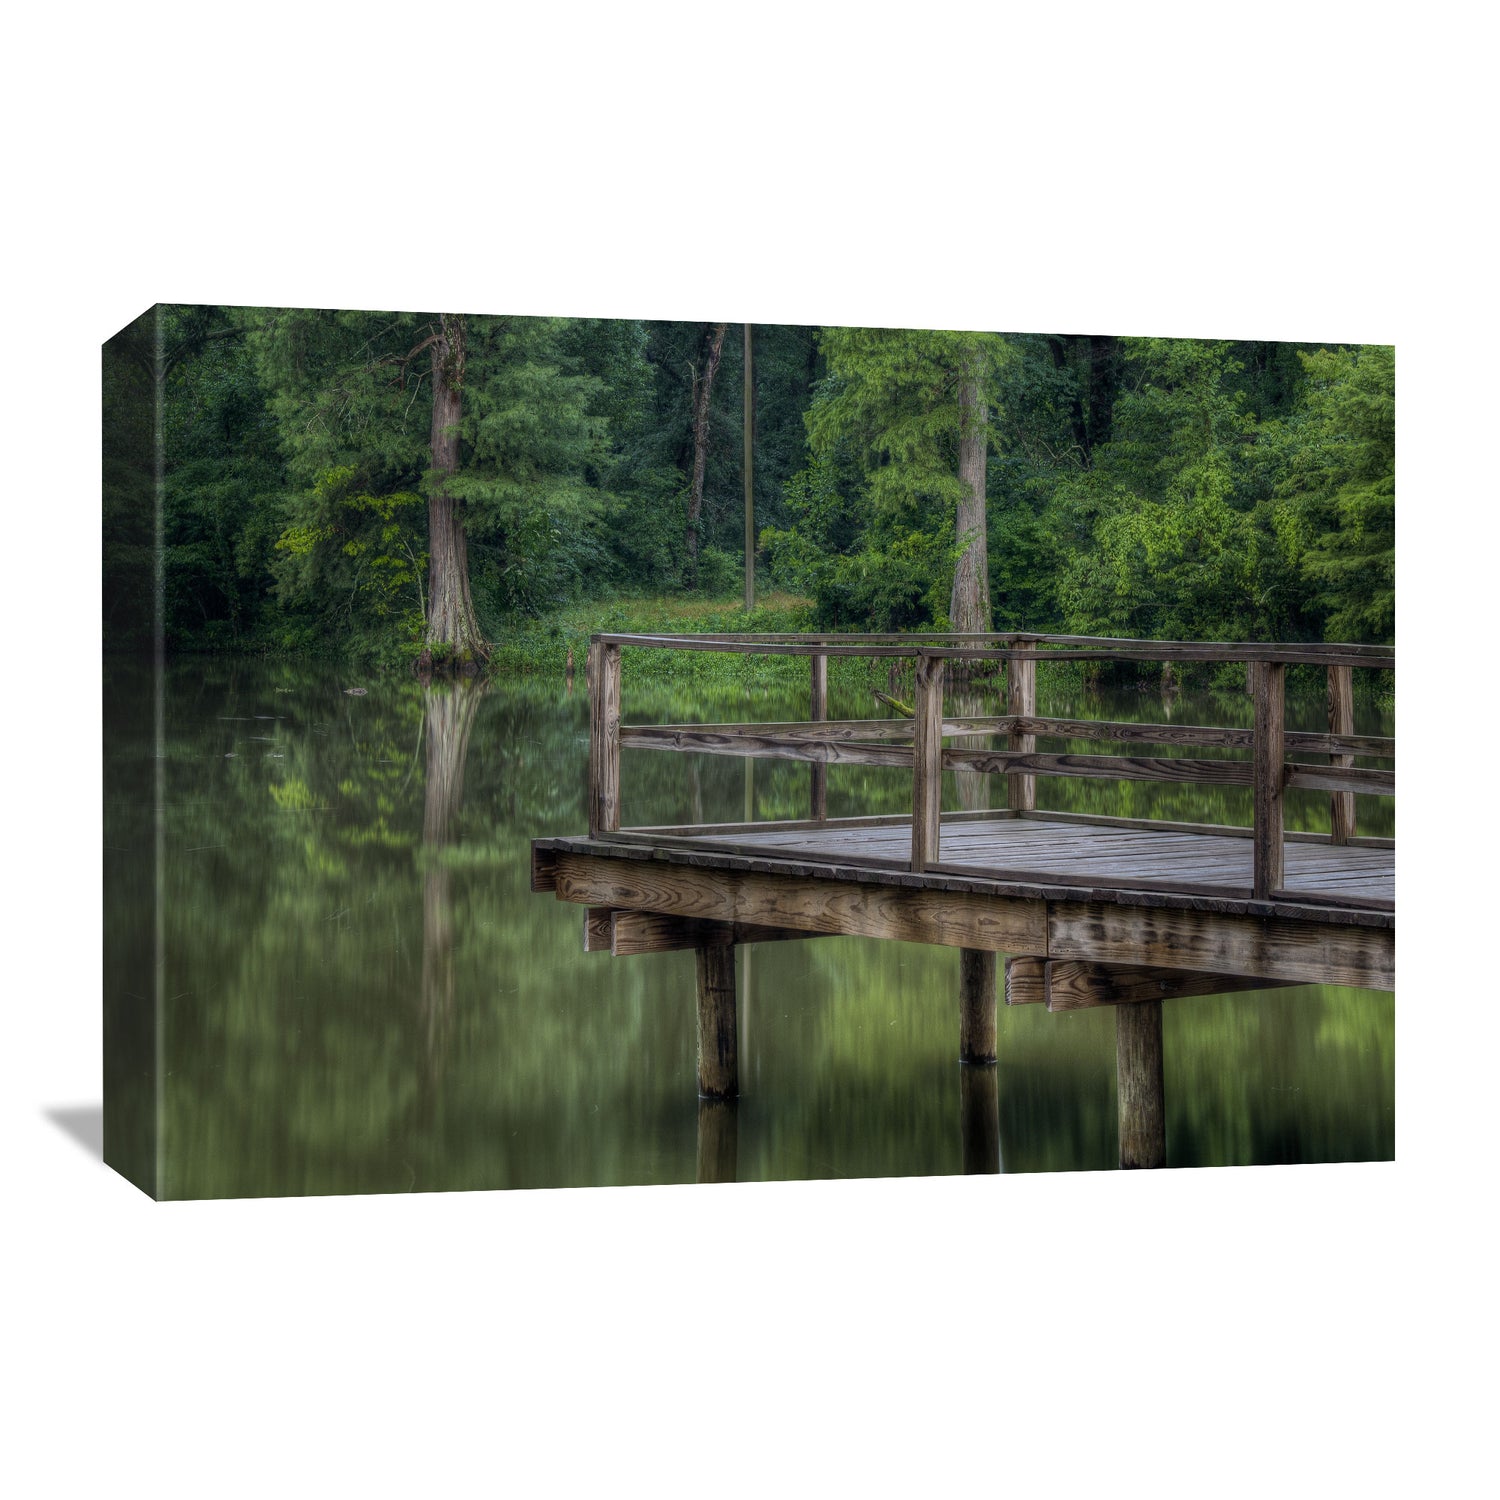 canvas wall art featuring a dock on Alligator Lake in the Mississippi Delta